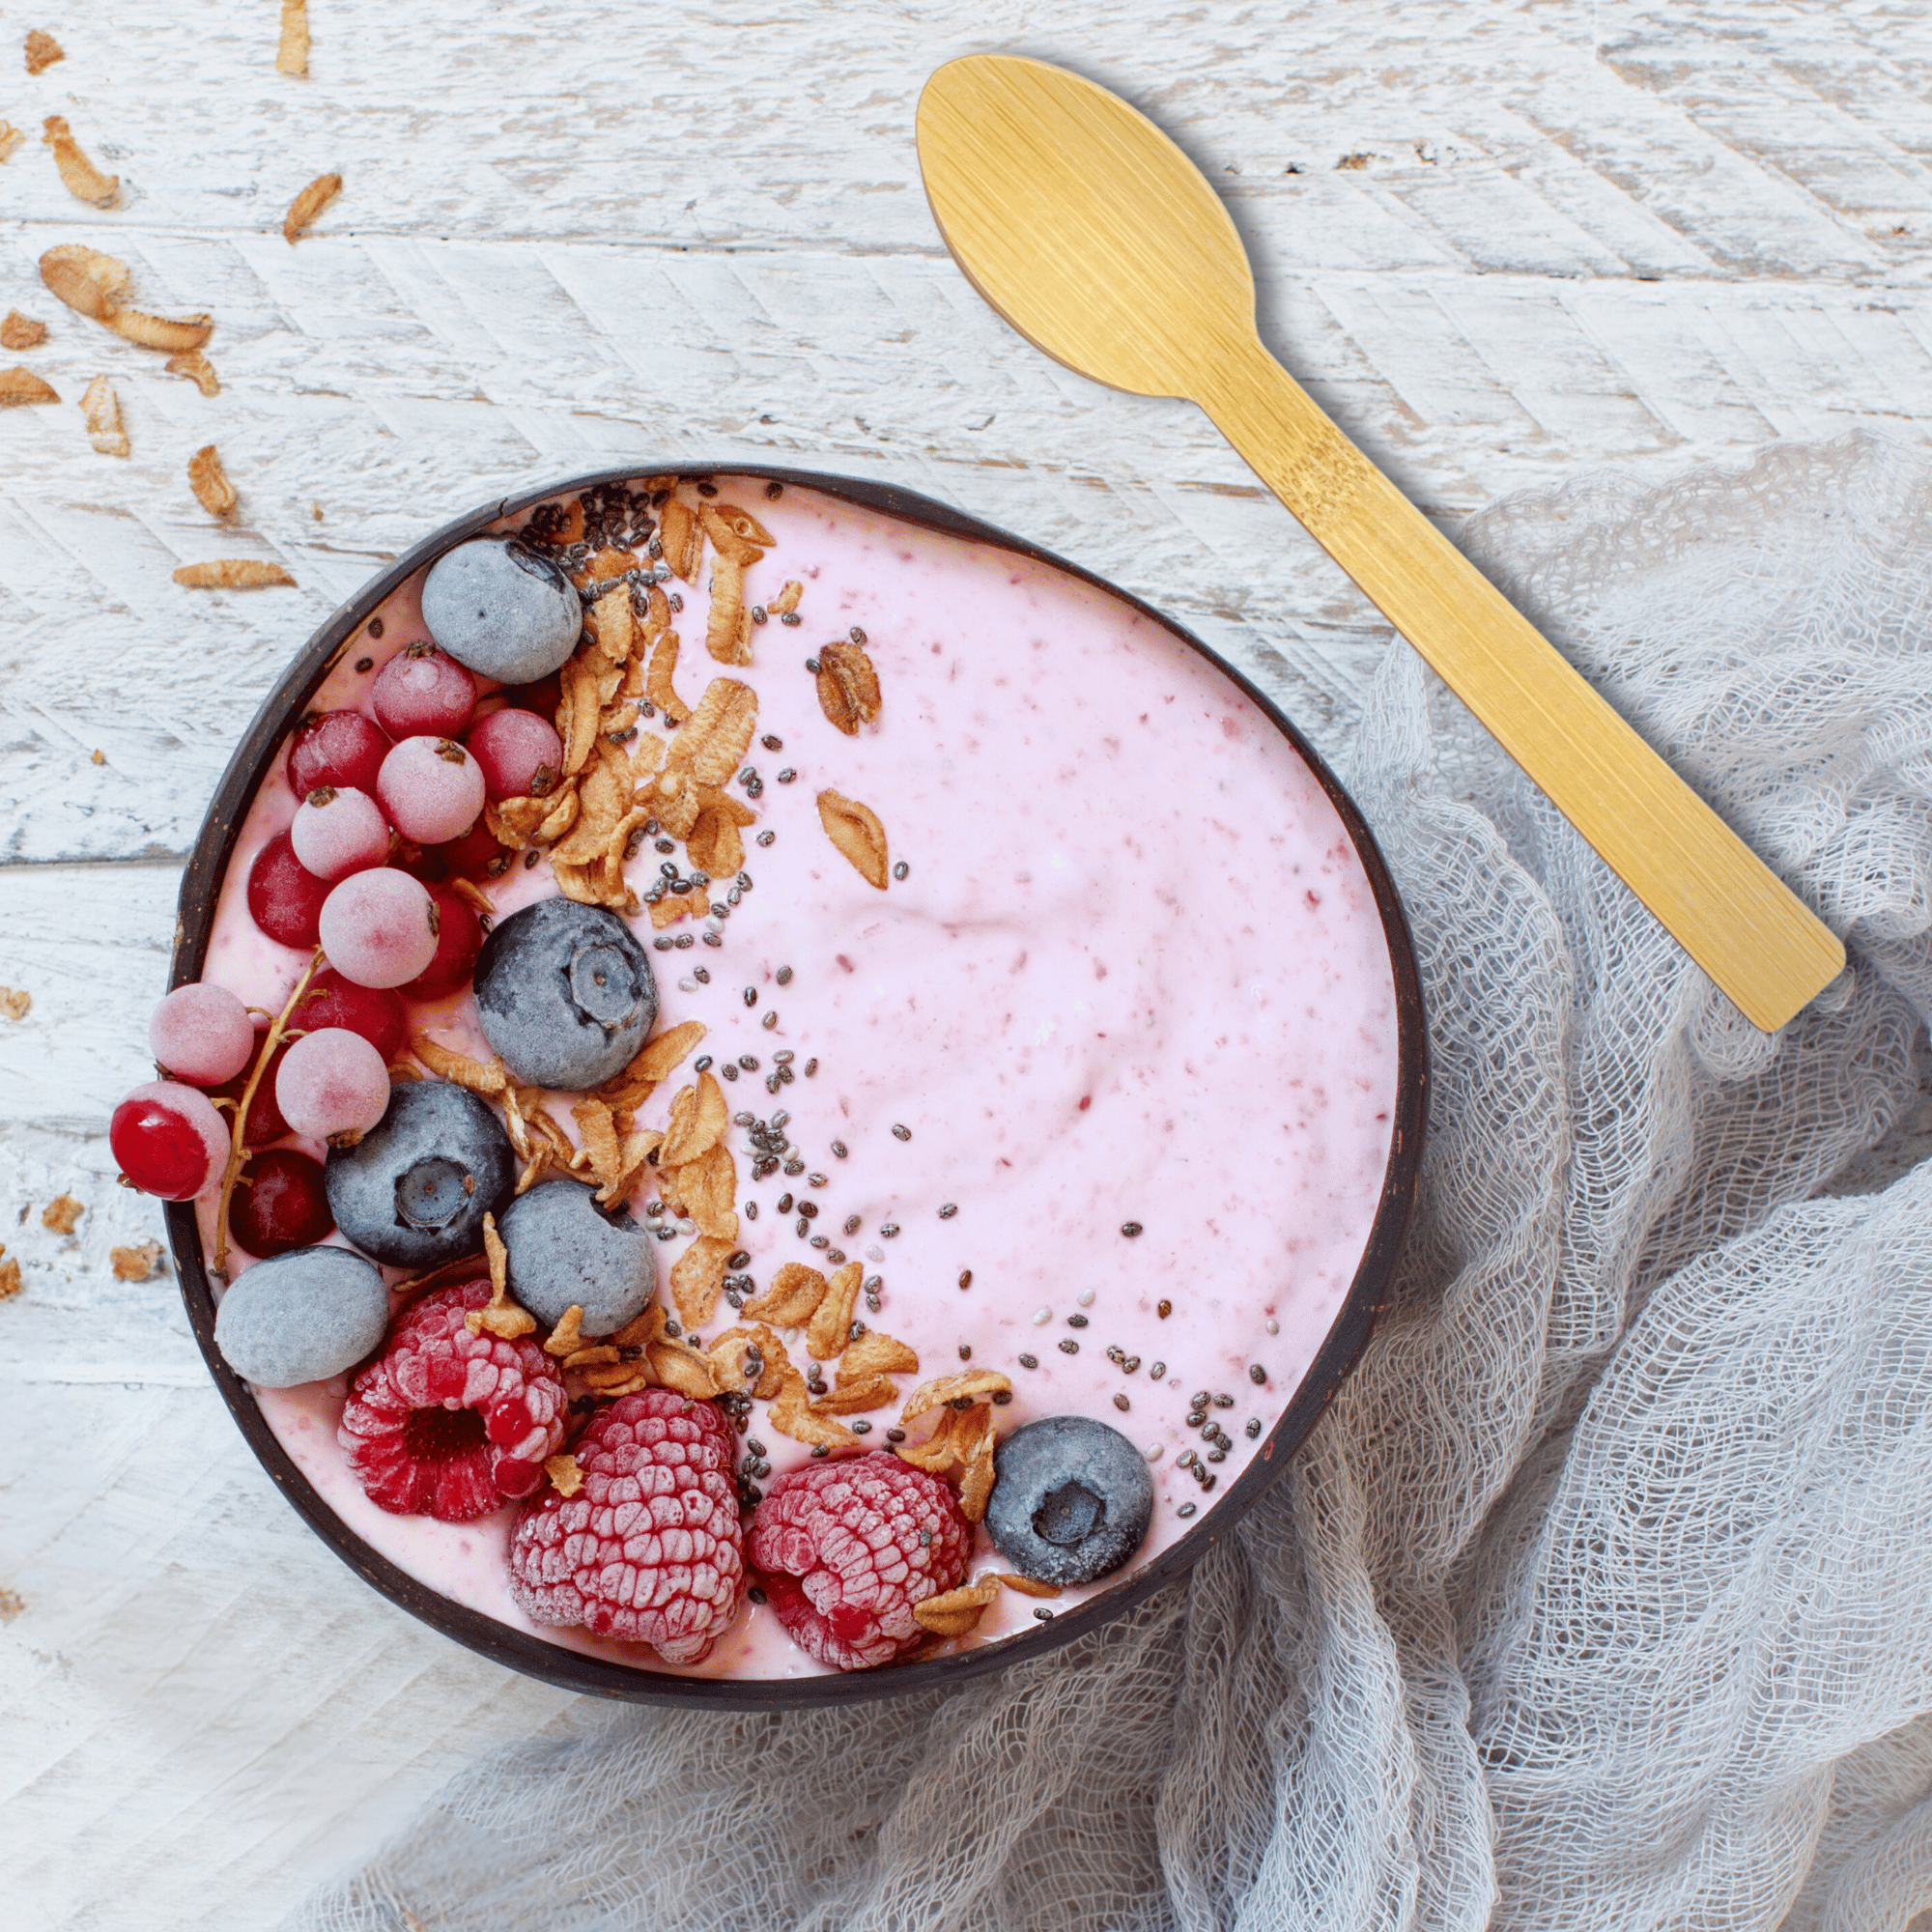 An appealing top-view image showcasing Holy City Straw Co.'s latest sustainable cutlery, a wooden spoon resting on the side of a bowl filled with creamy pink smoothie. The bowl is beautifully topped with a variety of frozen fruits including red grapes, blueberries, and raspberries, sprinkled with granola and chia seeds, all arranged on a rustic white wooden surface with a delicate gauze fabric underneath.